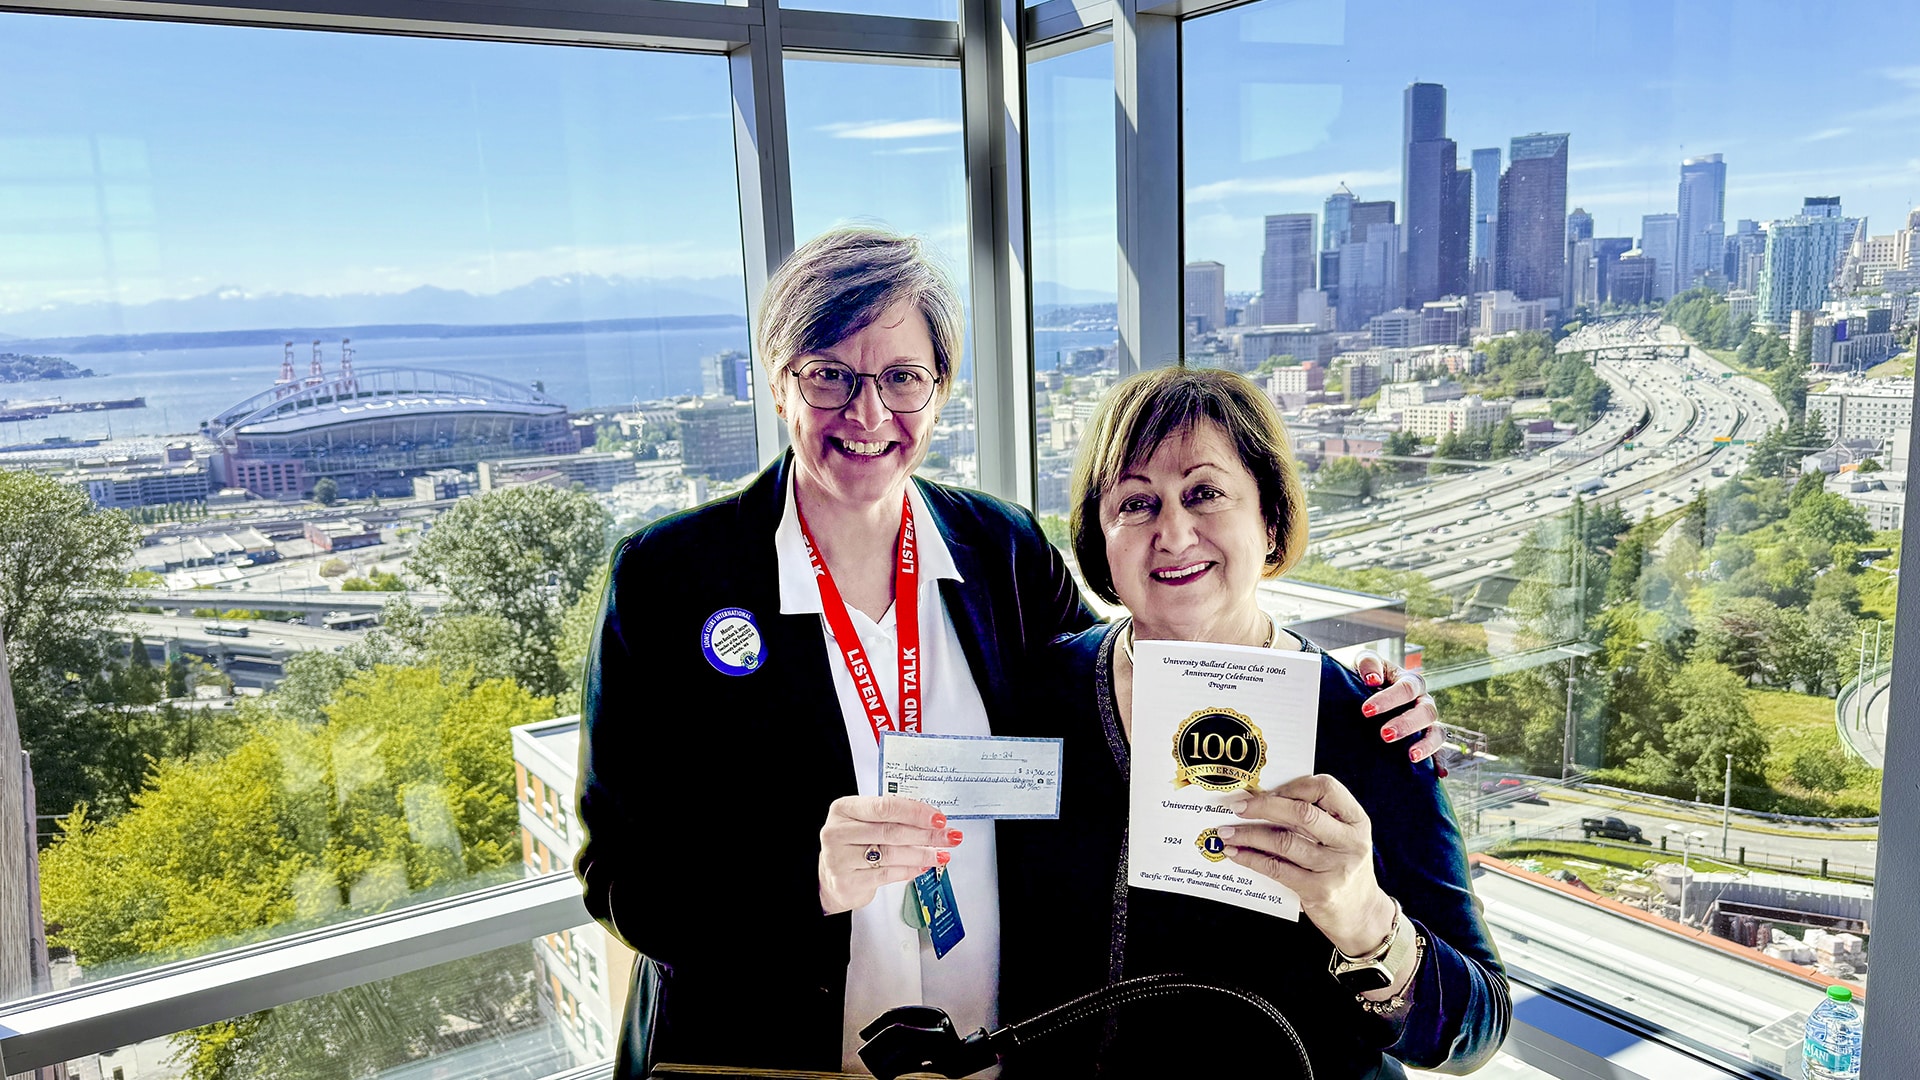 Executive Director Maura Berndsen stands next to University-Ballard Lions Club President, Norah Giraldo as they stand in front of a large panoramic window featuring a scenic view of iconic Seattle landmarks including Alki Beach in West Seattle, downtown Seattle, the Olympic Mountains, Lumen Field, and I-5. Berndsen holds up a check while Giraldo holds up a program book.